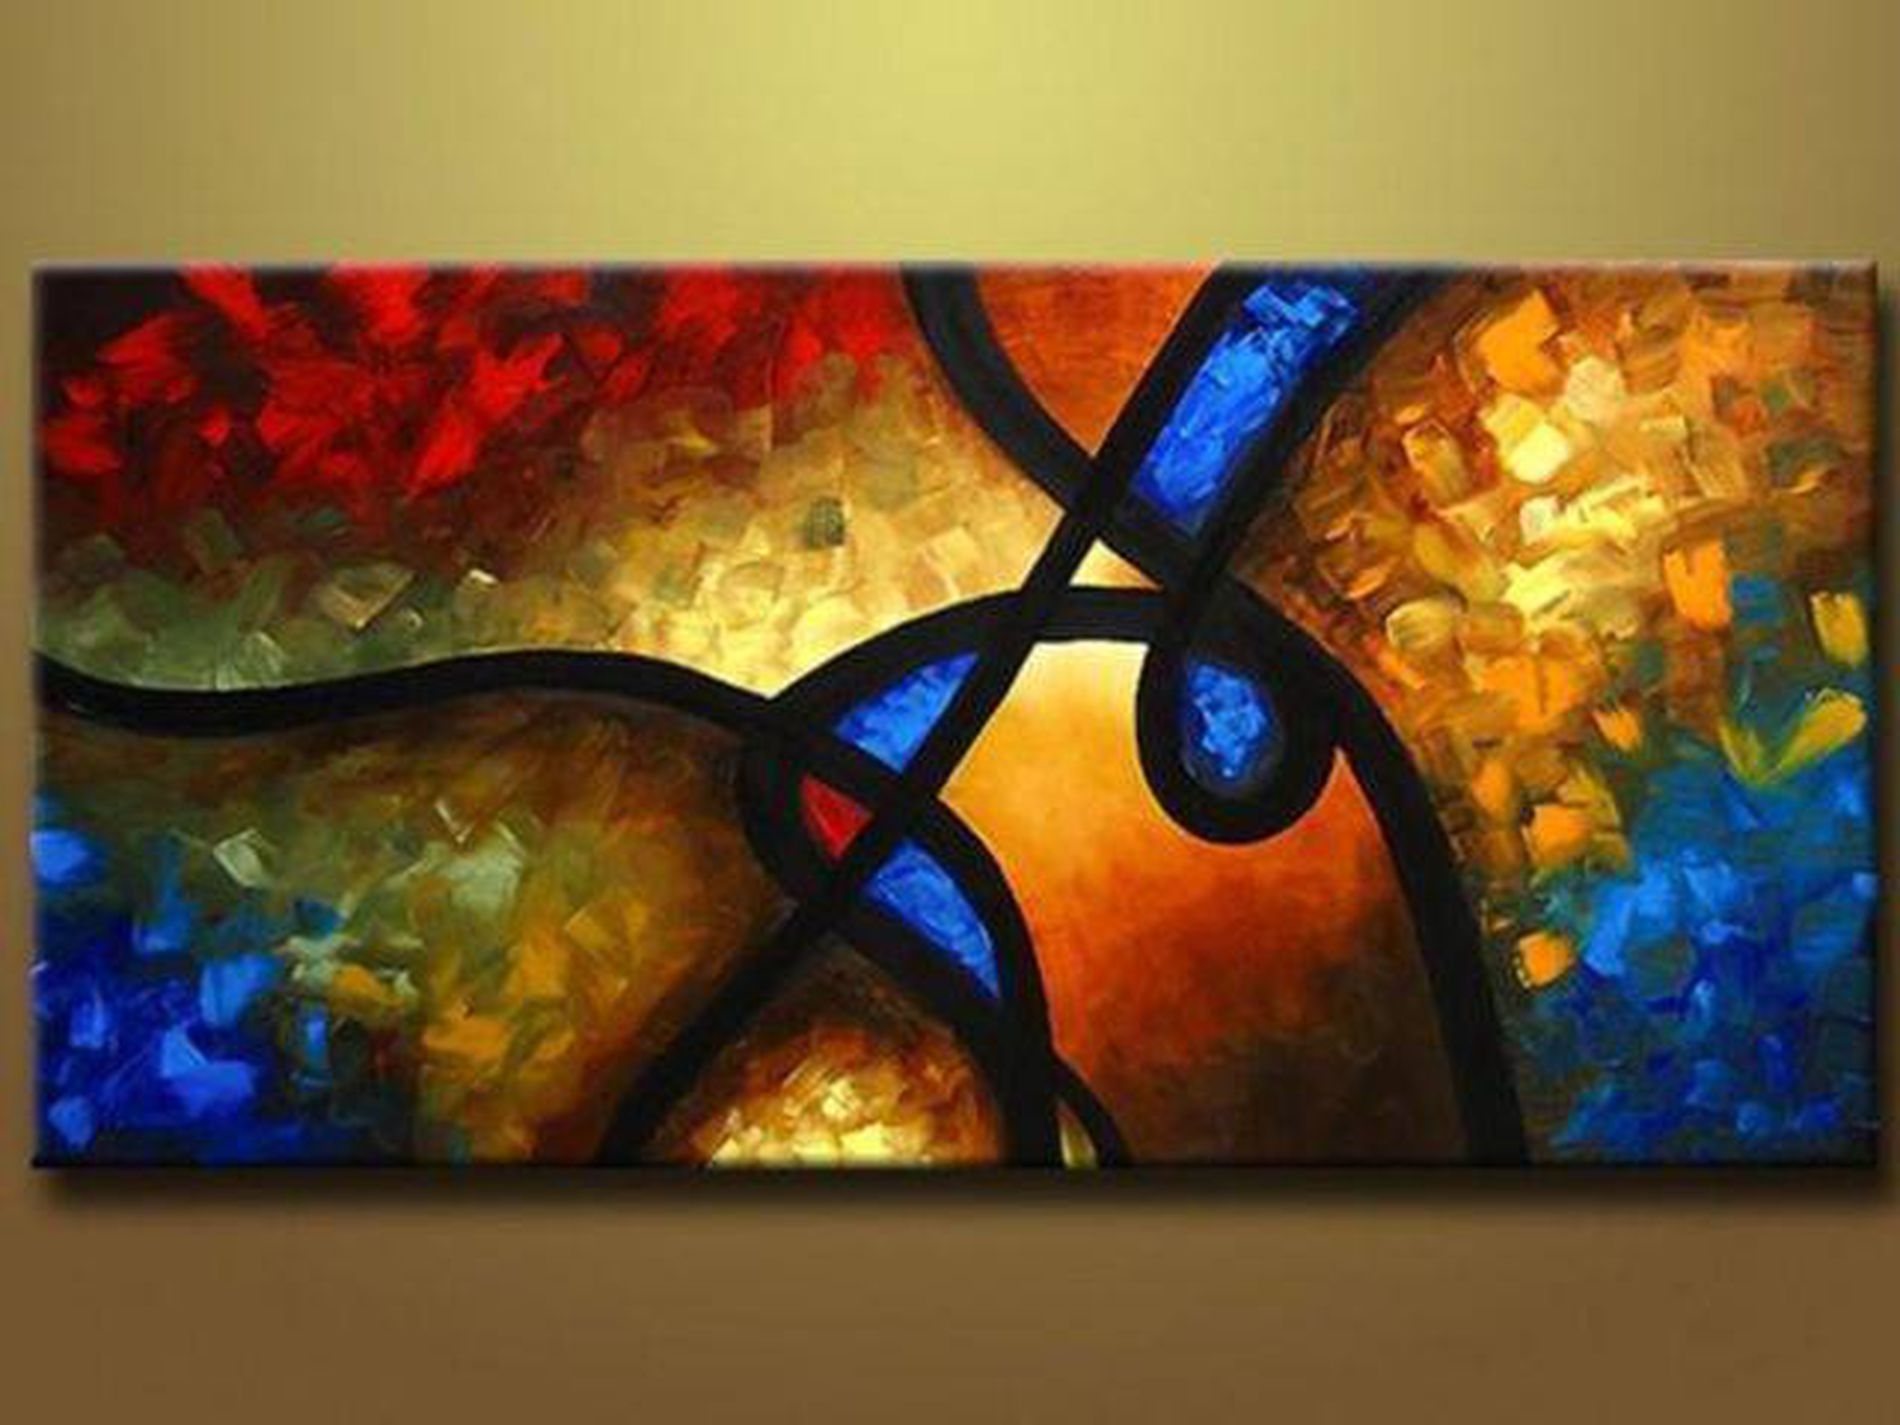 Online Decorative Artwork Business for Sale with Stock